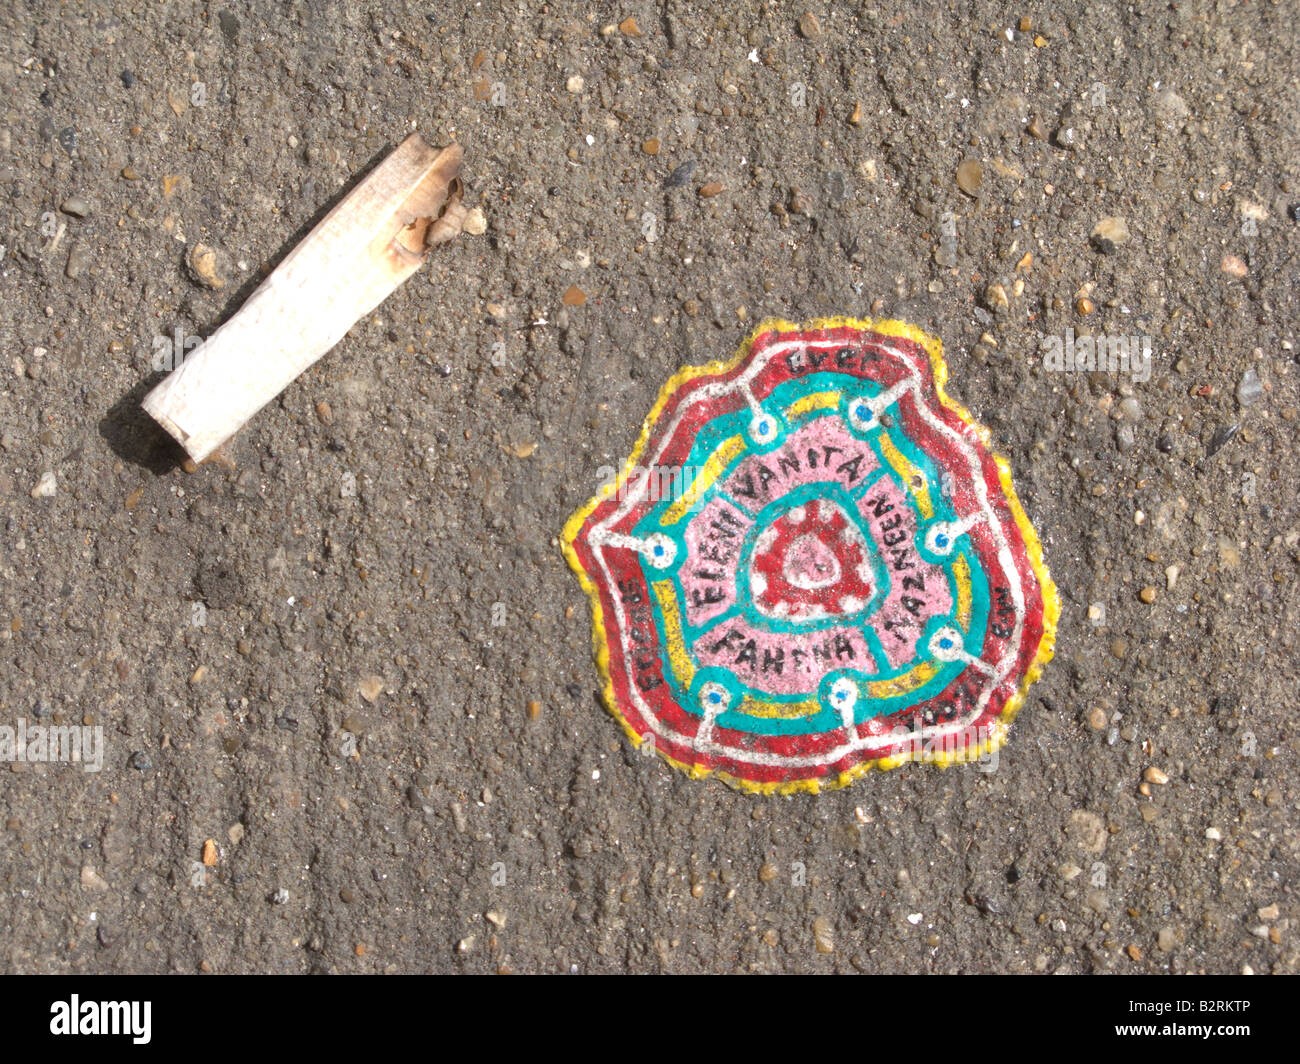 Street Art: Chewing Gum Painting on a London Street Stock Photo